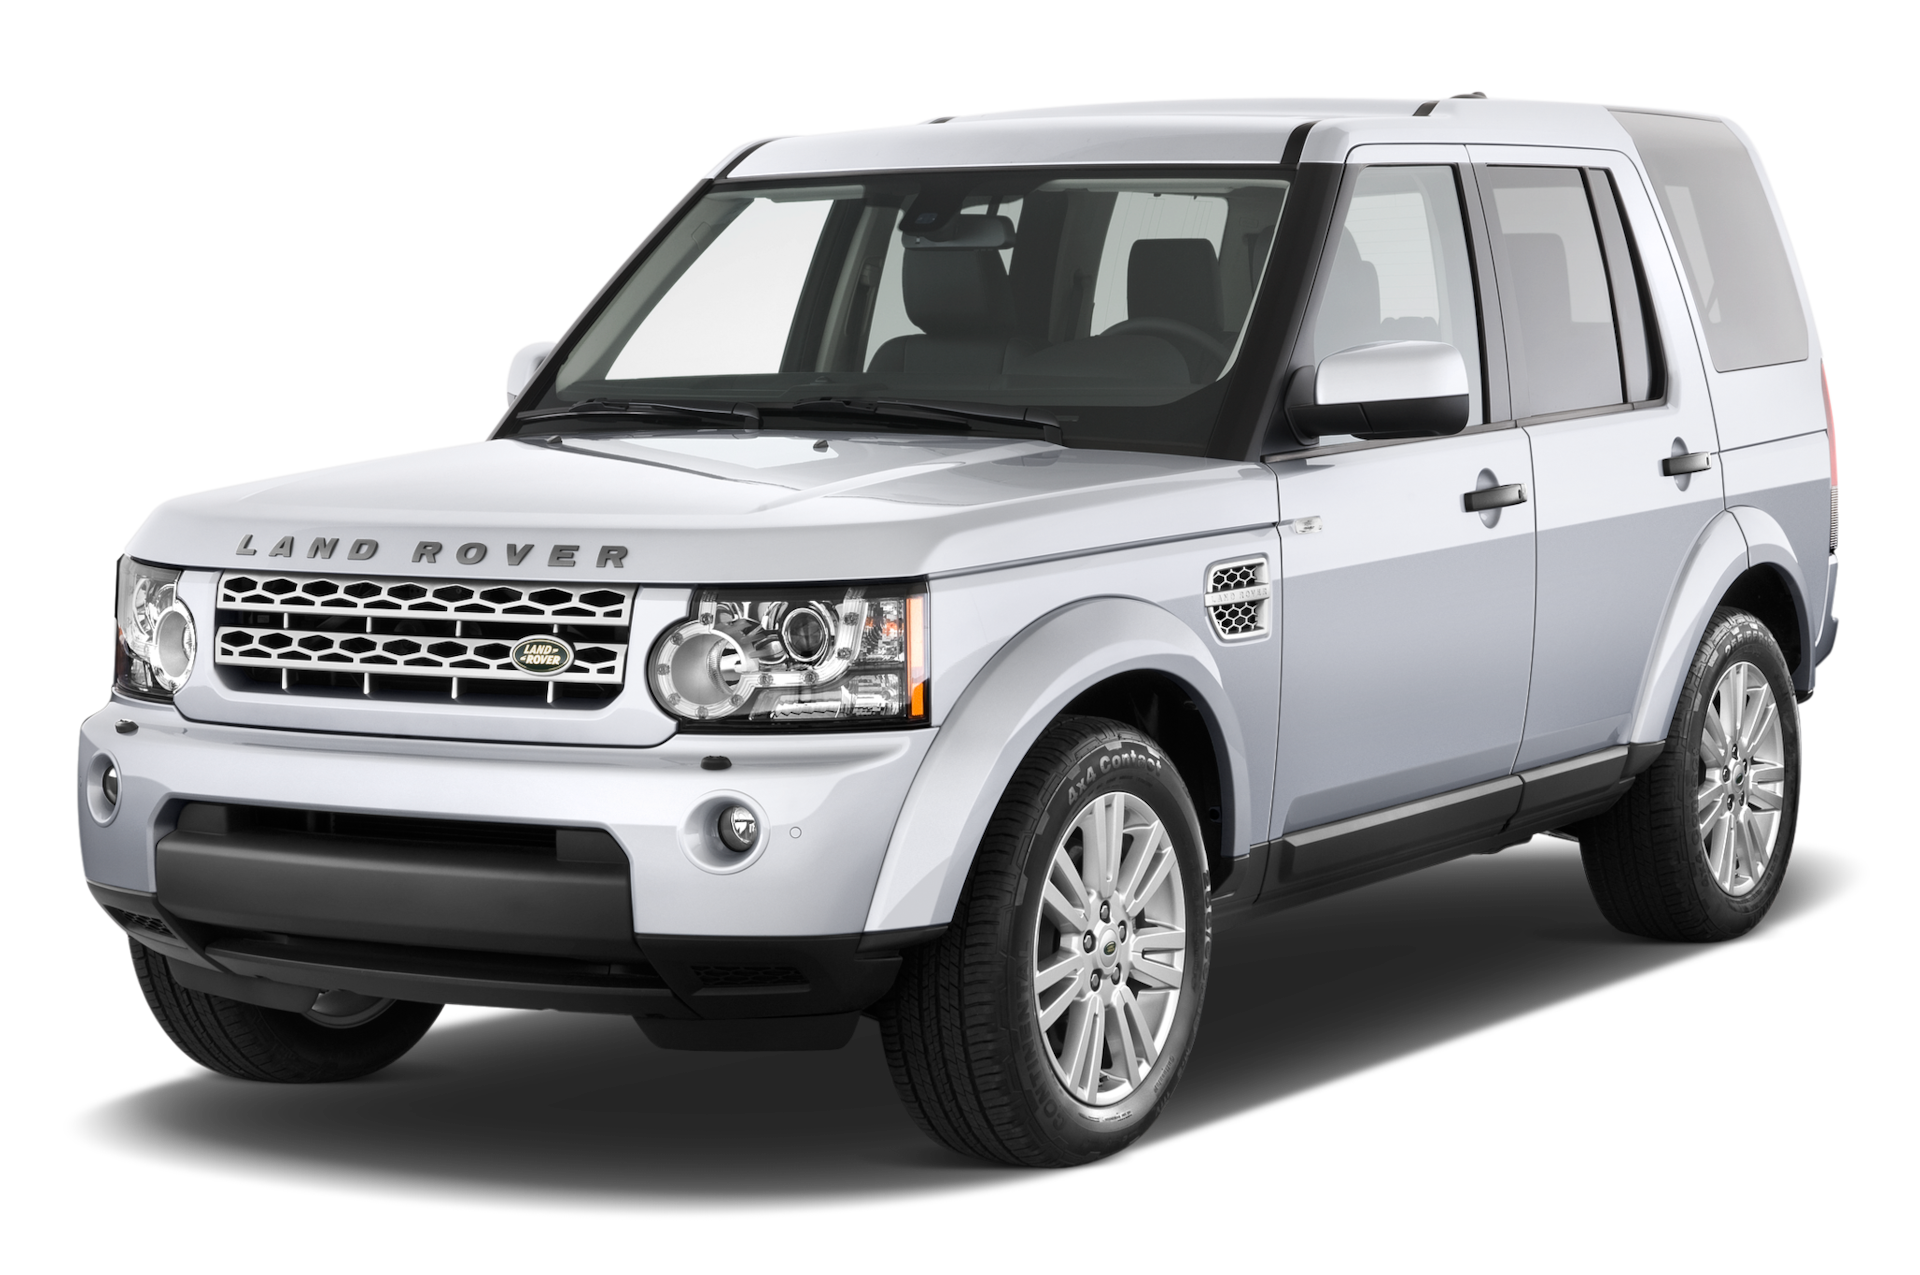 2010 Land Rover LR4 Prices, Reviews, and Photos - MotorTrend